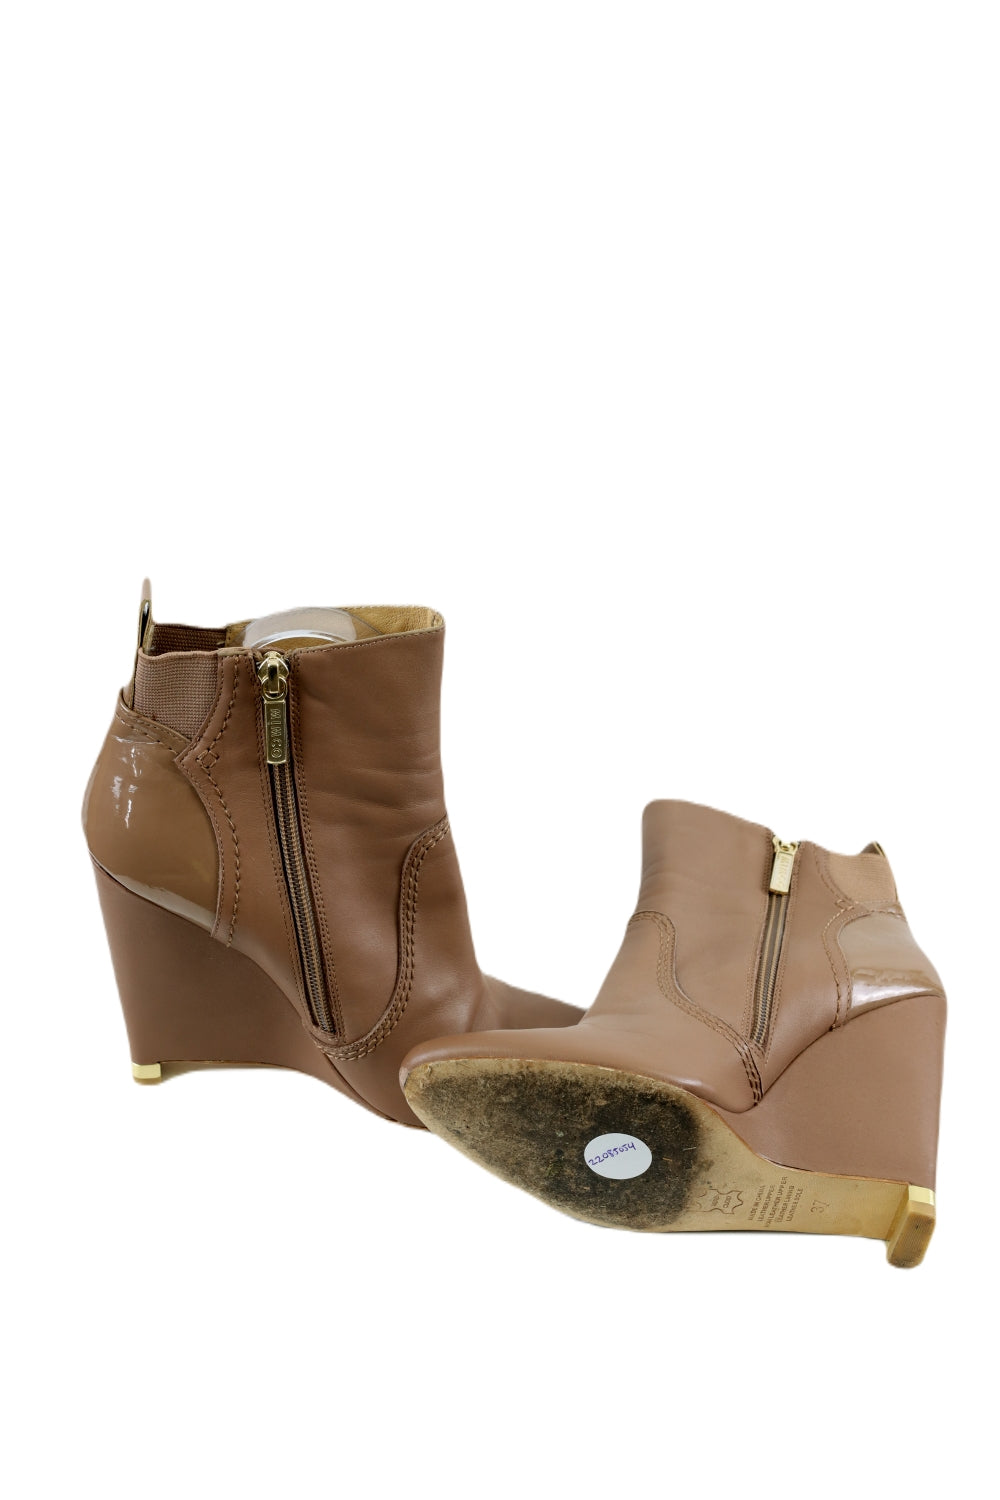 Mimco Brown Wedges 37